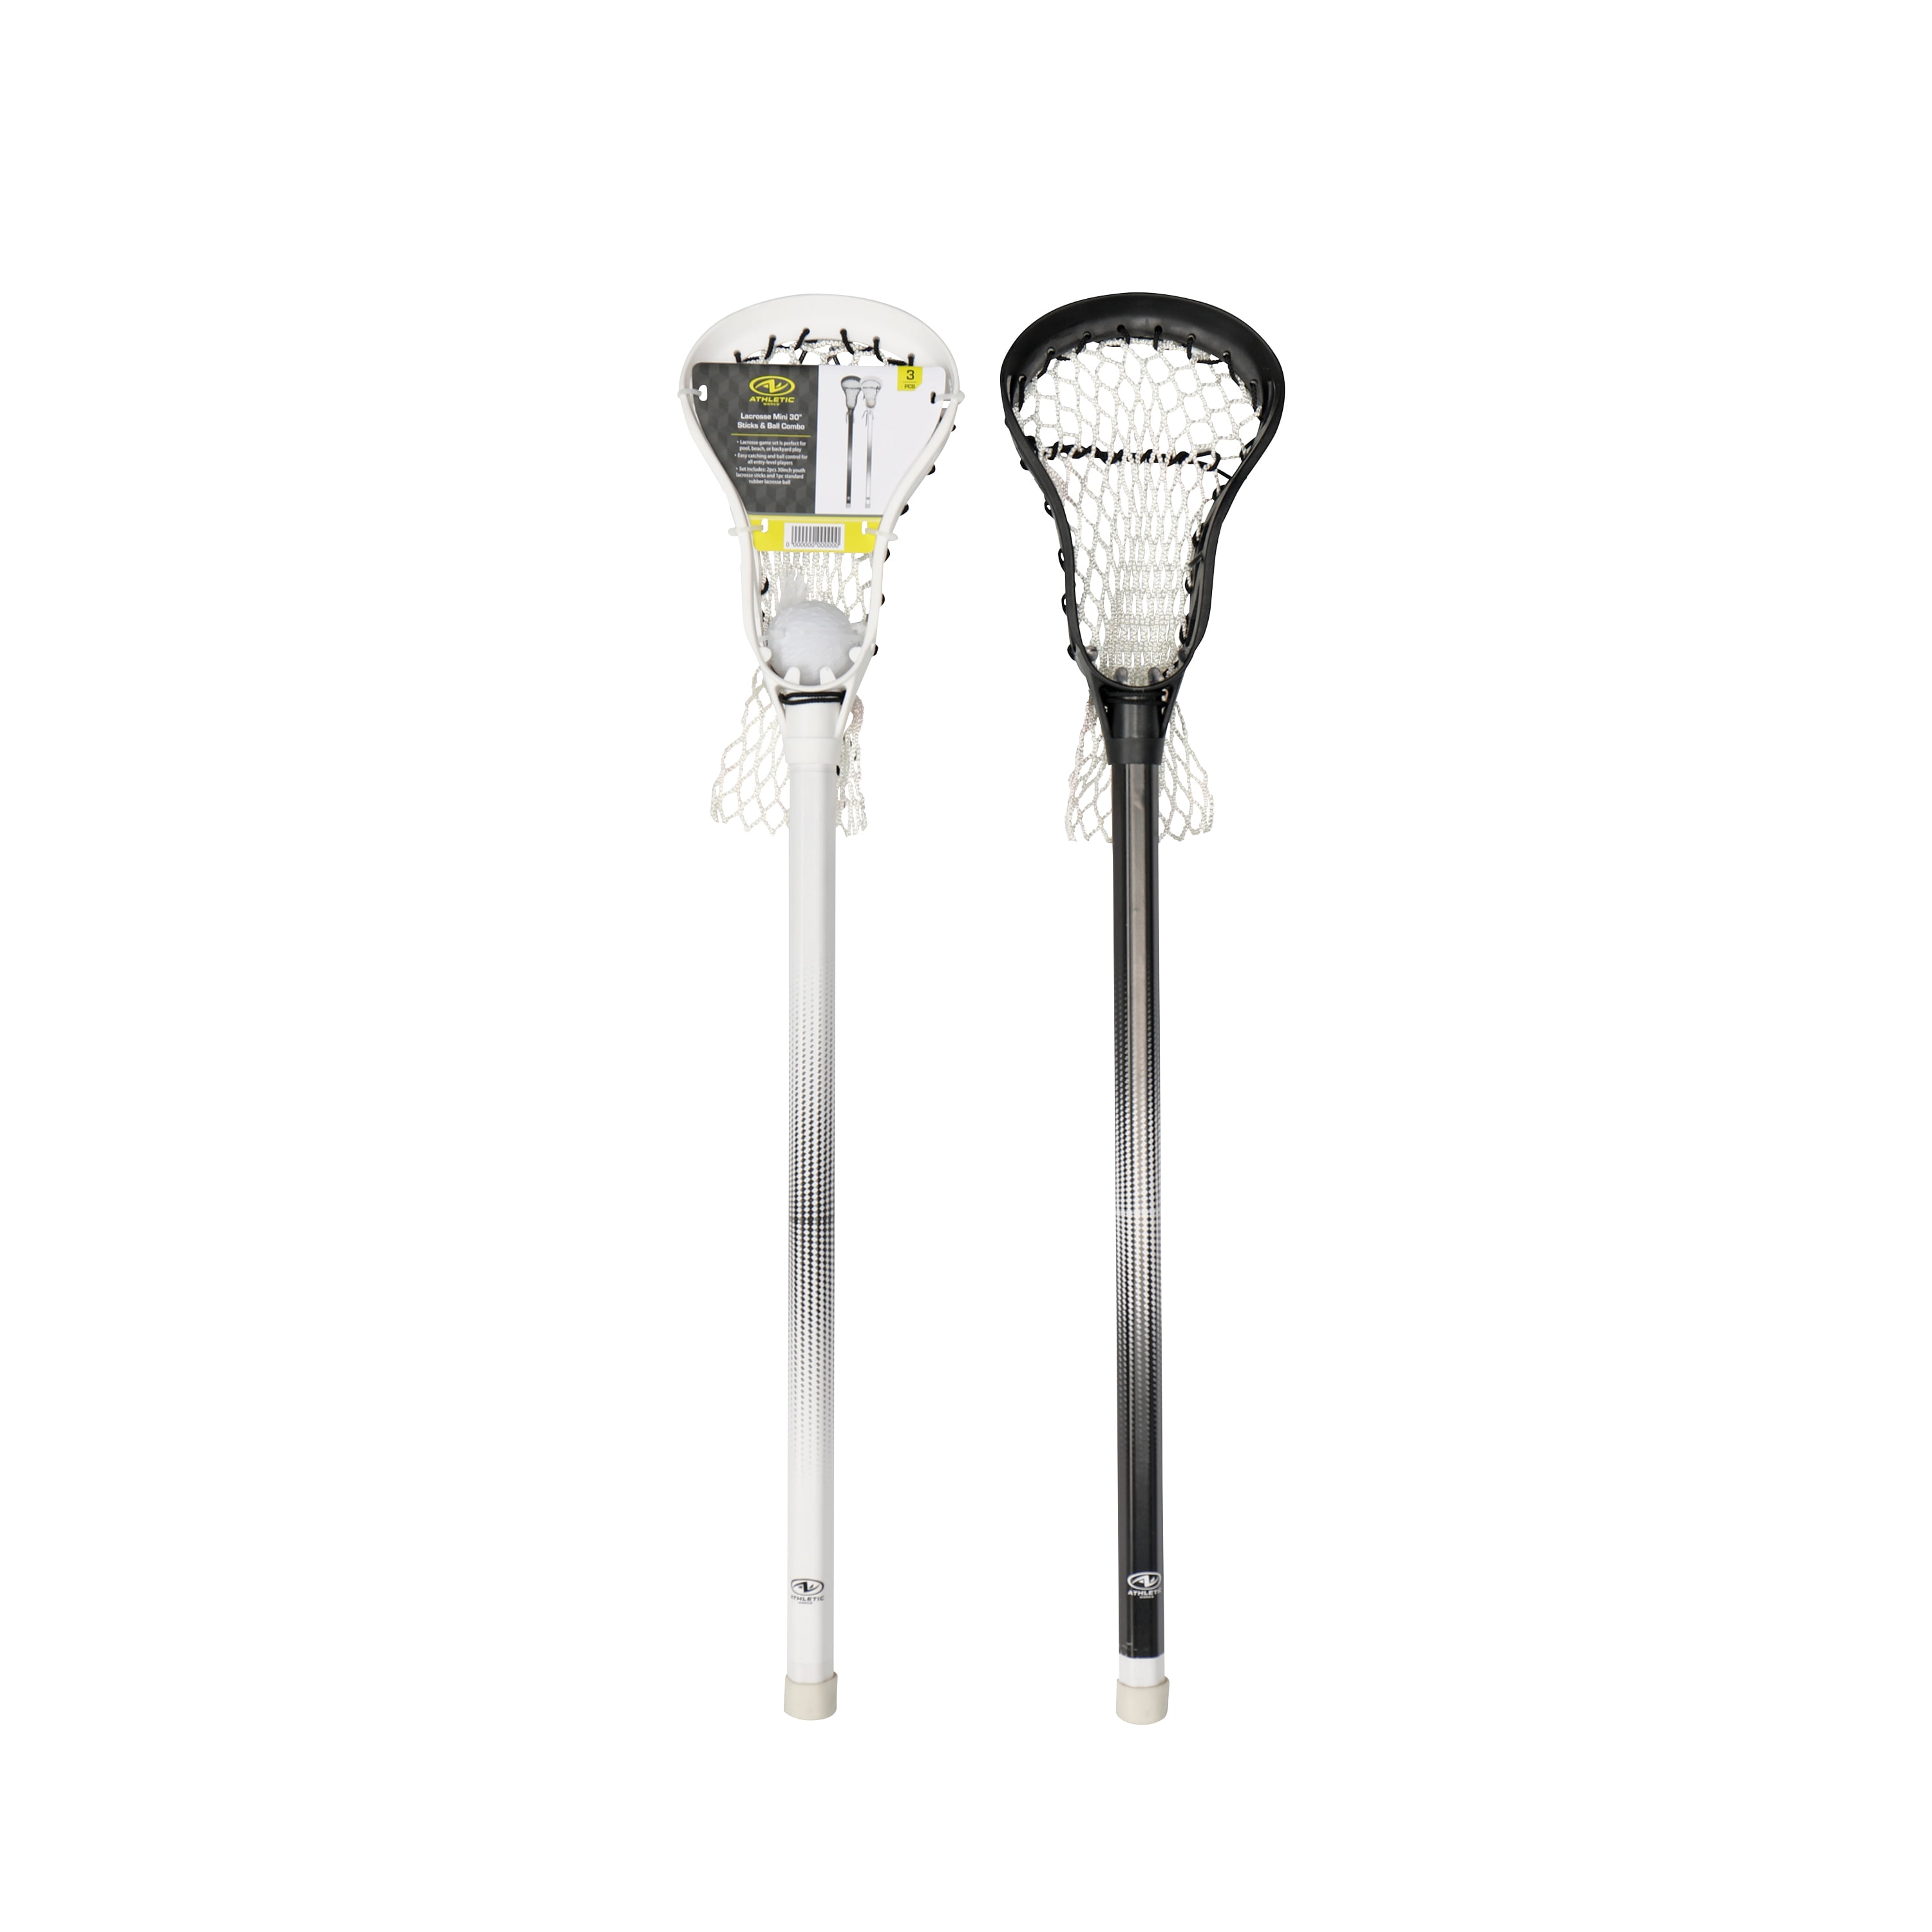 Franklin 32 inch lacrosse set with  1 stick & 1 ball 